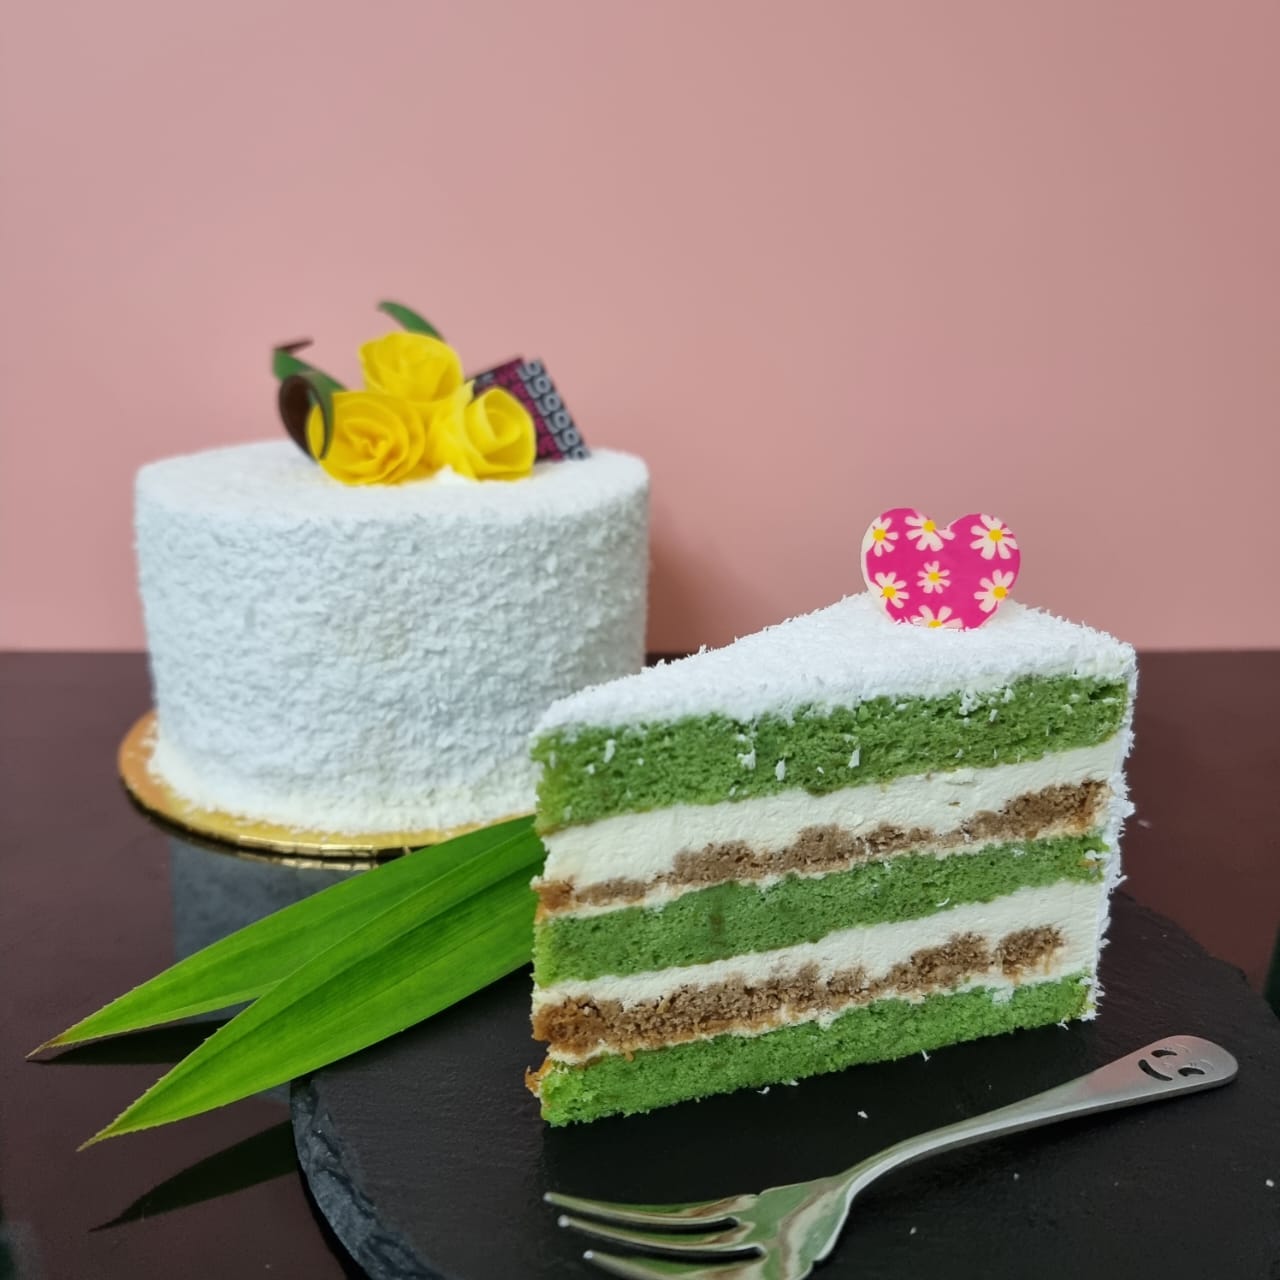 The most unique chiffon cakes to savour in Singapore